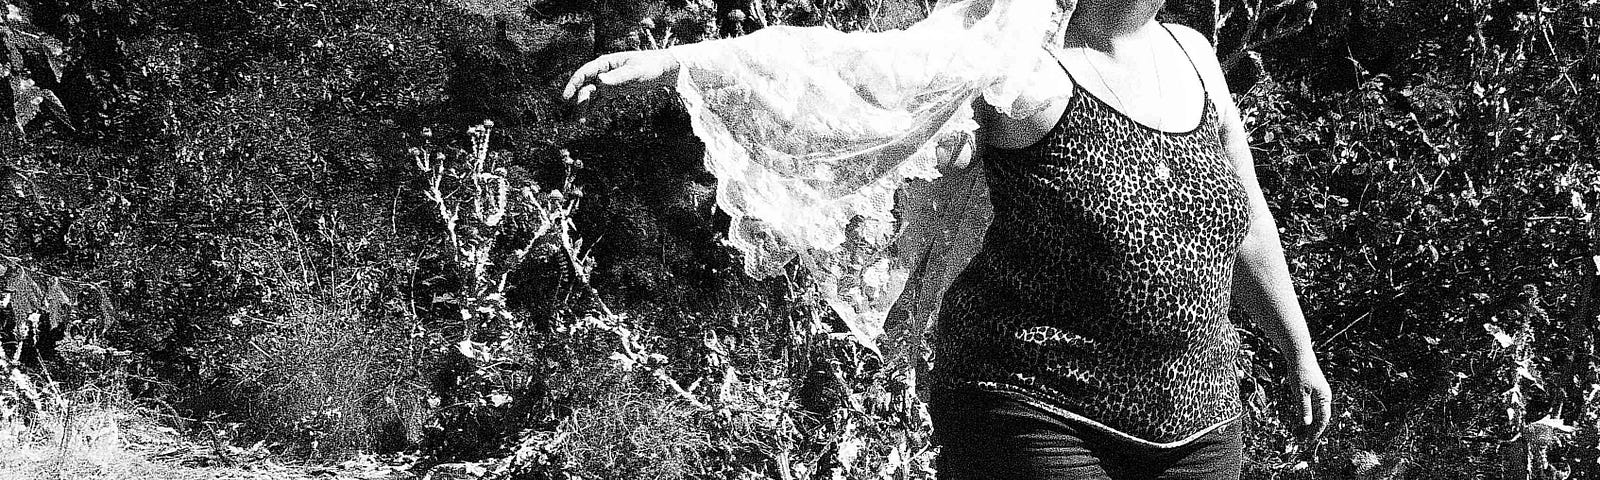 Black and white photo of a fat woman wearing cutoff shorts, leopard print spaghetti top, wedding veil posing out doors.